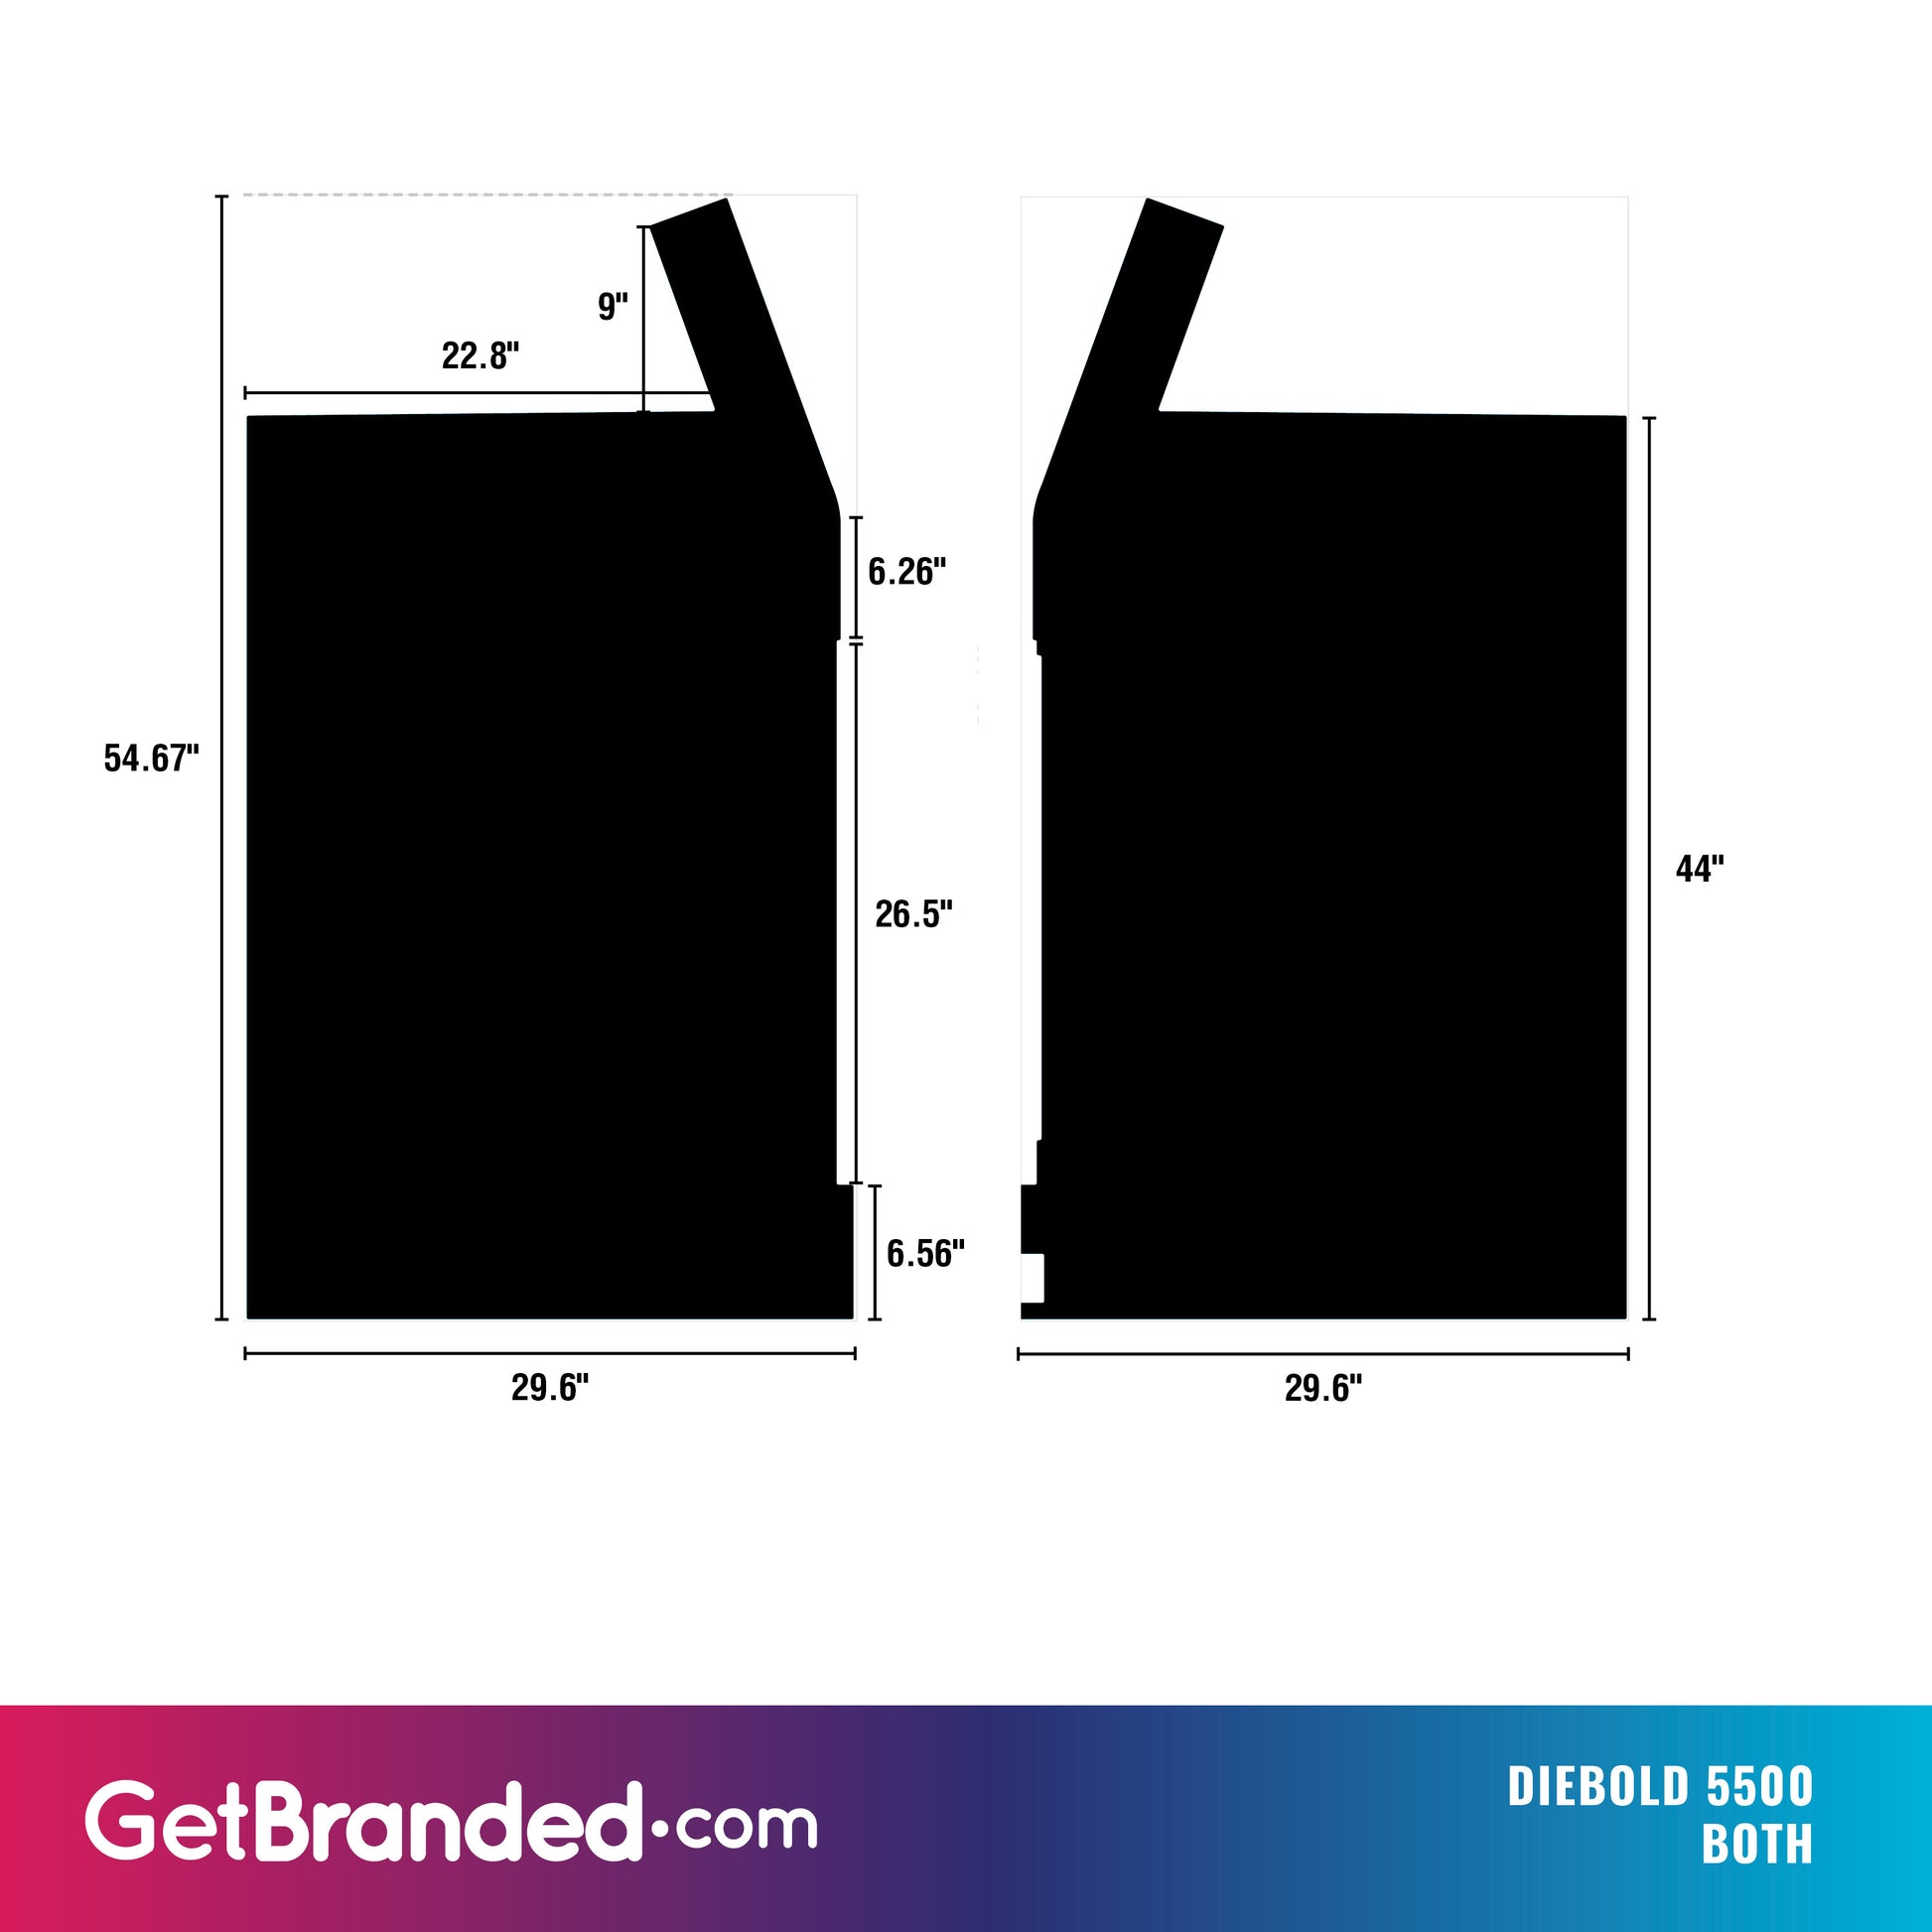 Diebold 5500 both side panels dimensions